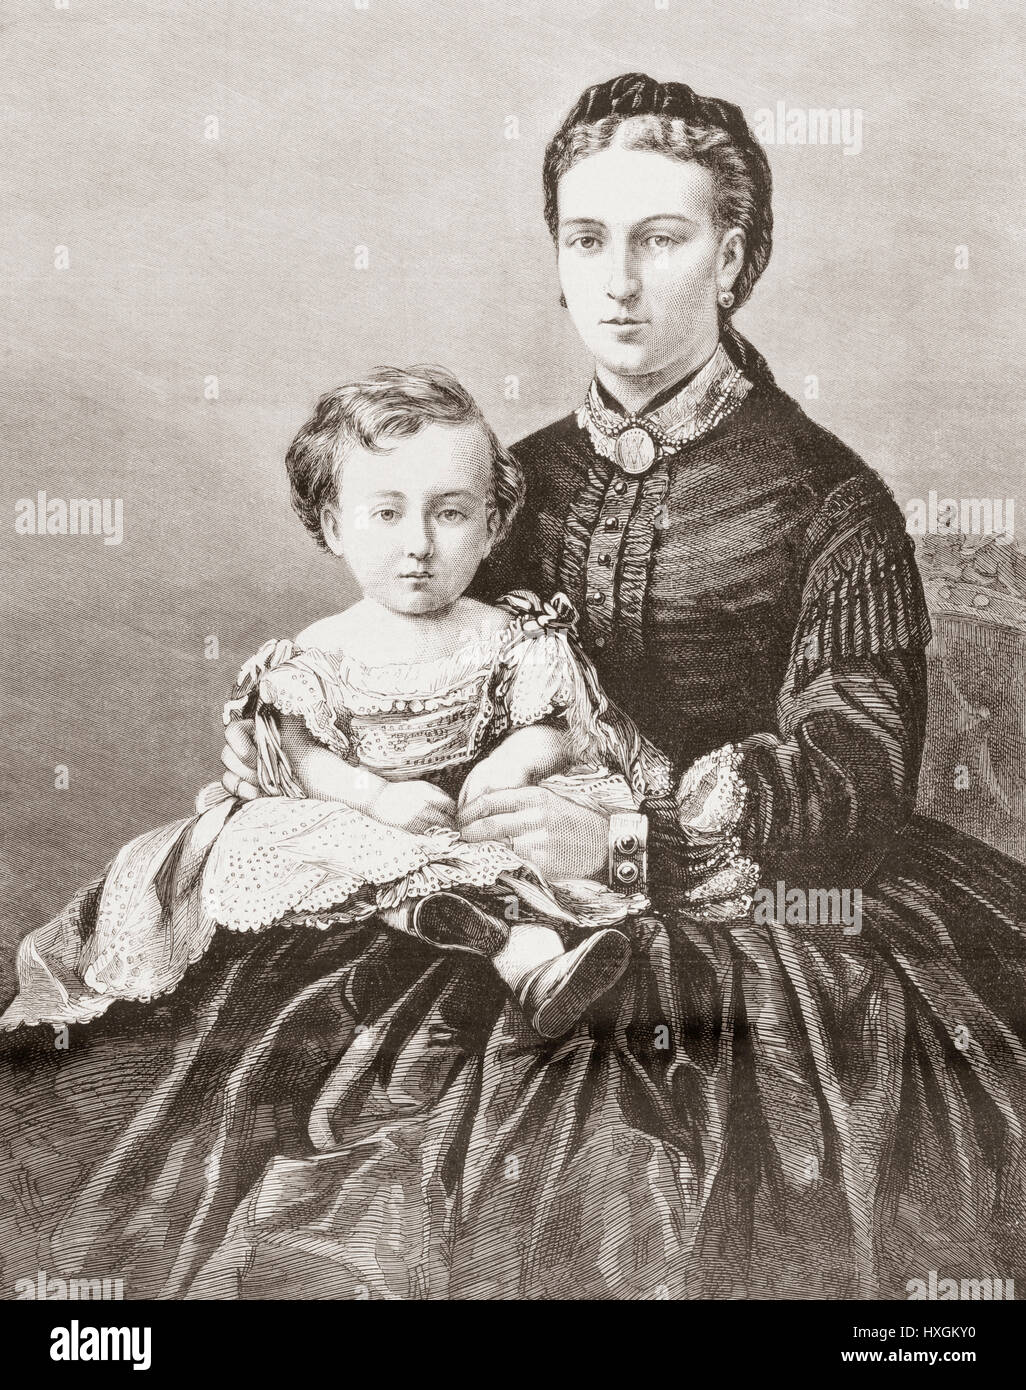 Alexandra of Denmark (1844 – 1925) seen here whilst still Princess of Wales, holding her son prince Albert-Victor.  Future Queen of the United Kingdom of Great Britain and Ireland and Empress of India as the wife of King-Emperor Edward VII. Prince Albert Victor, Duke of Clarence and Avondale,1864 – 1892.  From L'Univers Illustre published 1867. Stock Photo